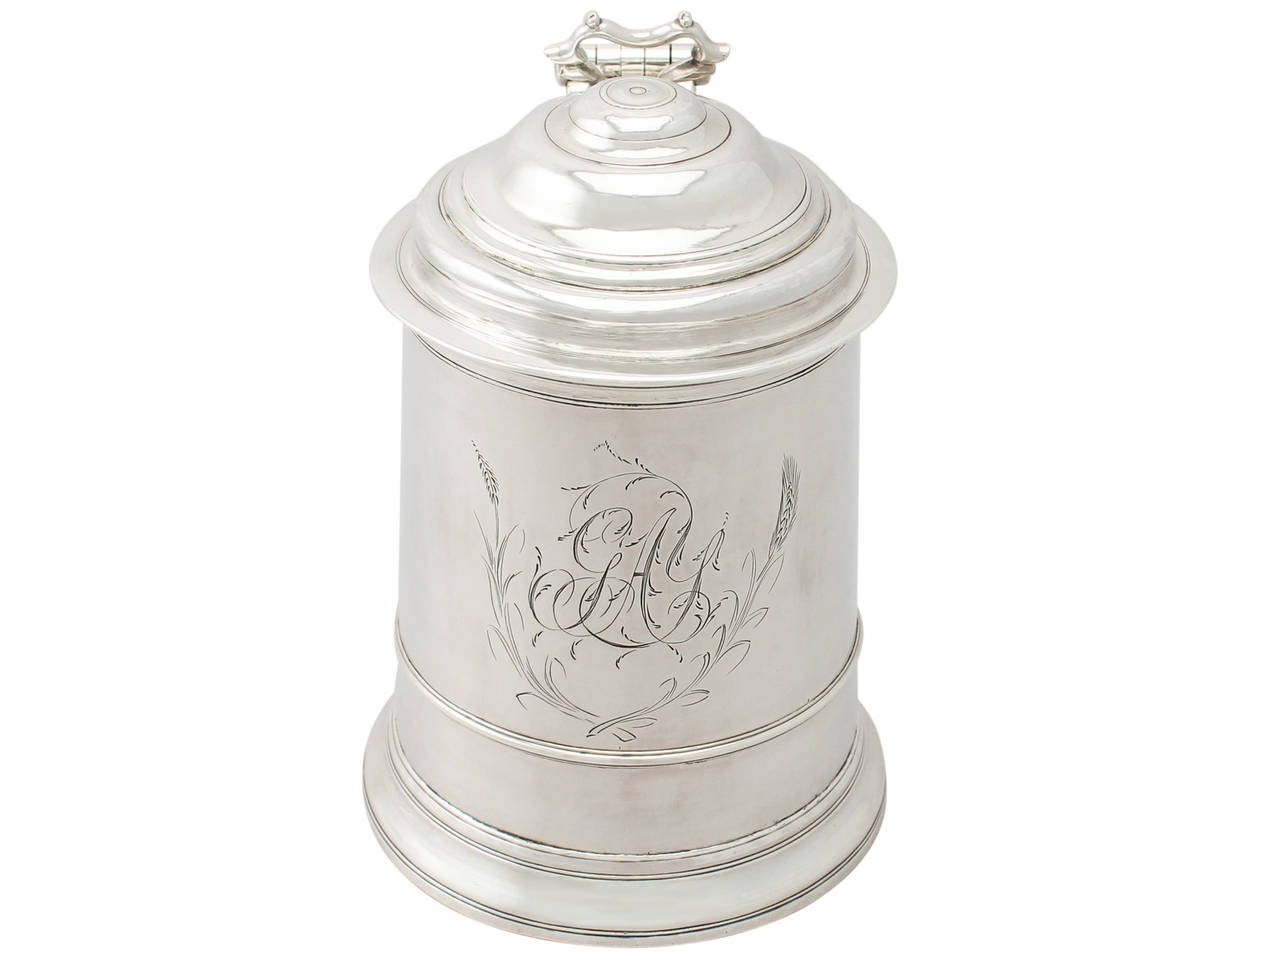 An exceptional, fine and impressive, rare antique Georgian Newcastle sterling silver tankard by Thomas Makepeace I; part of our collectable silverware collection.

This exceptional and rare antique George II Newcastle sterling silver tankard has a